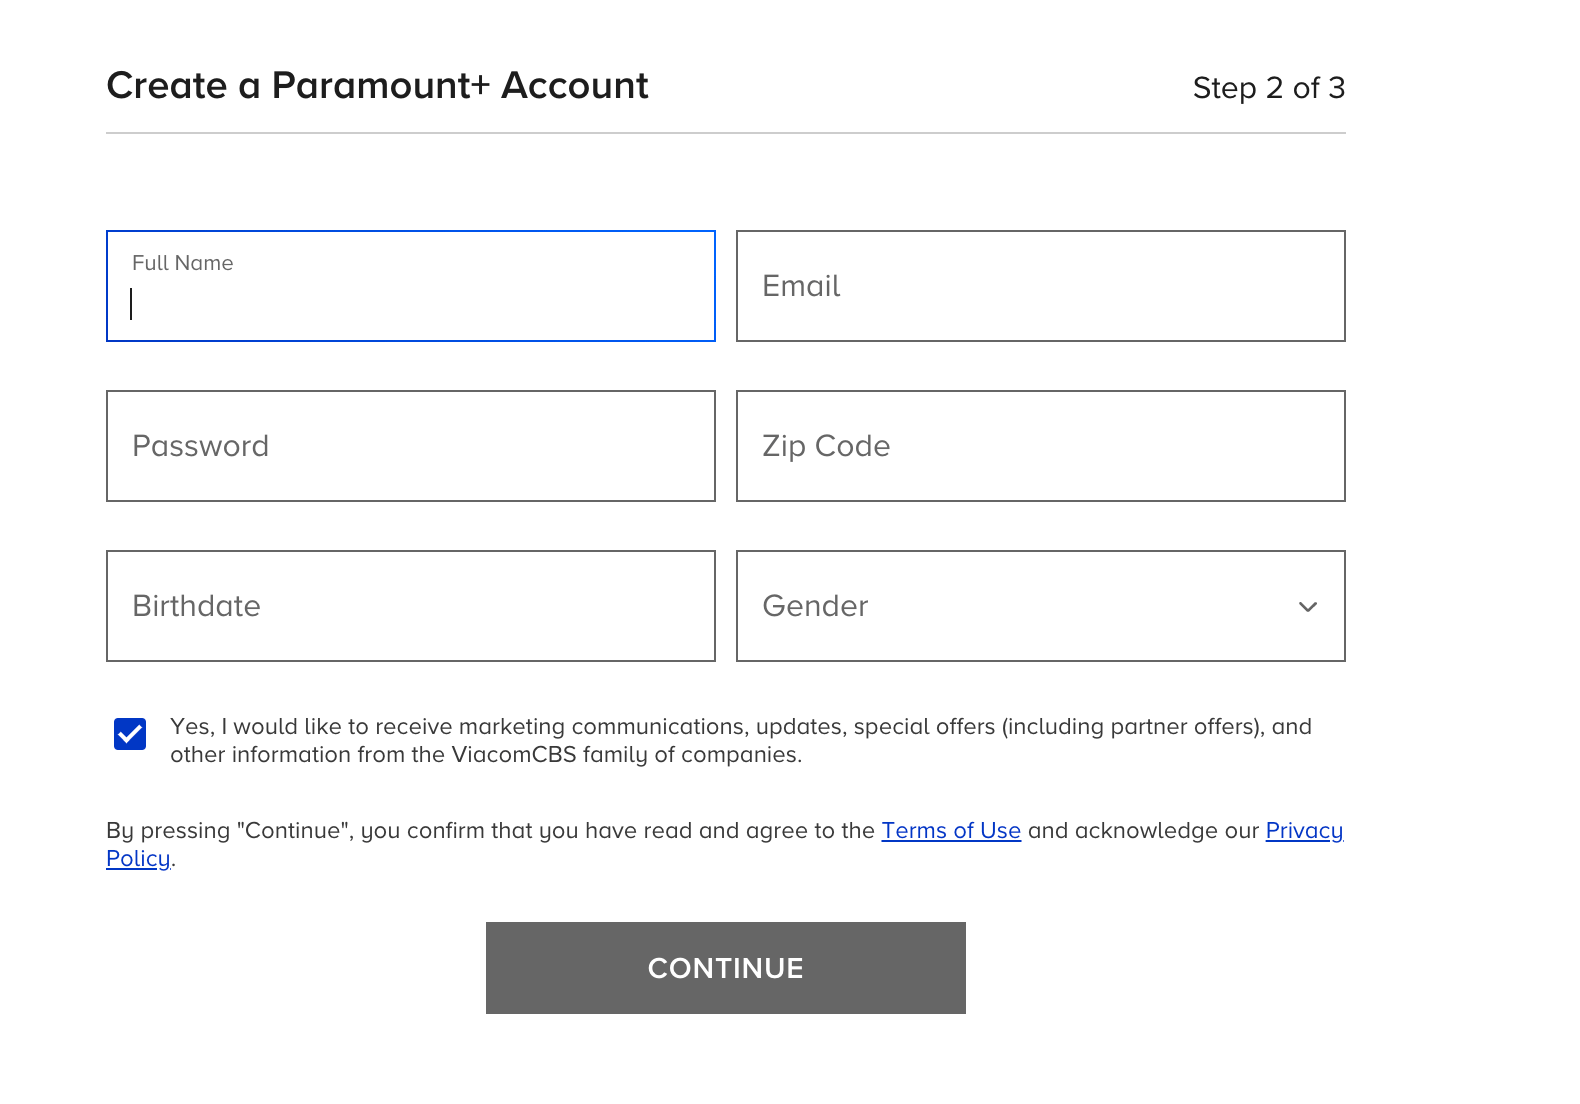 Enter all the required details